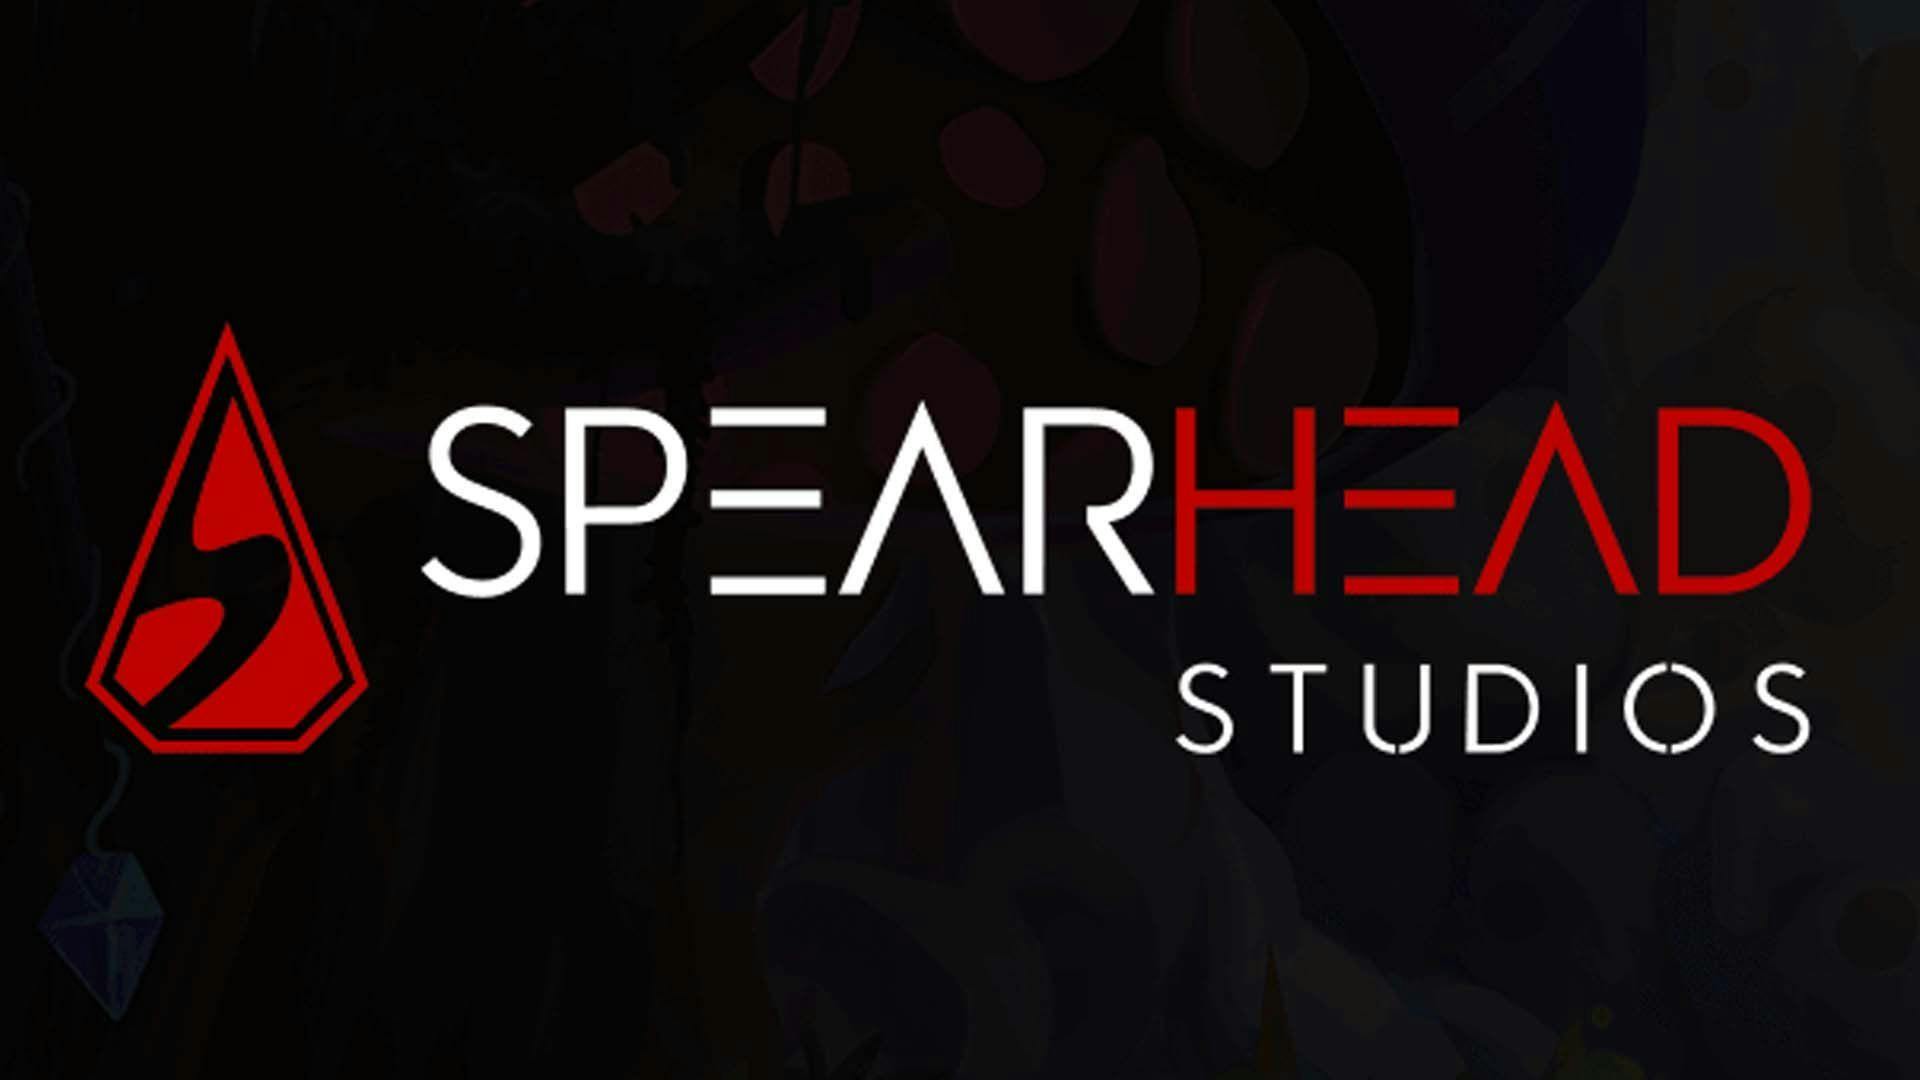 Spearhead Studios Producer Free Slot Online Games